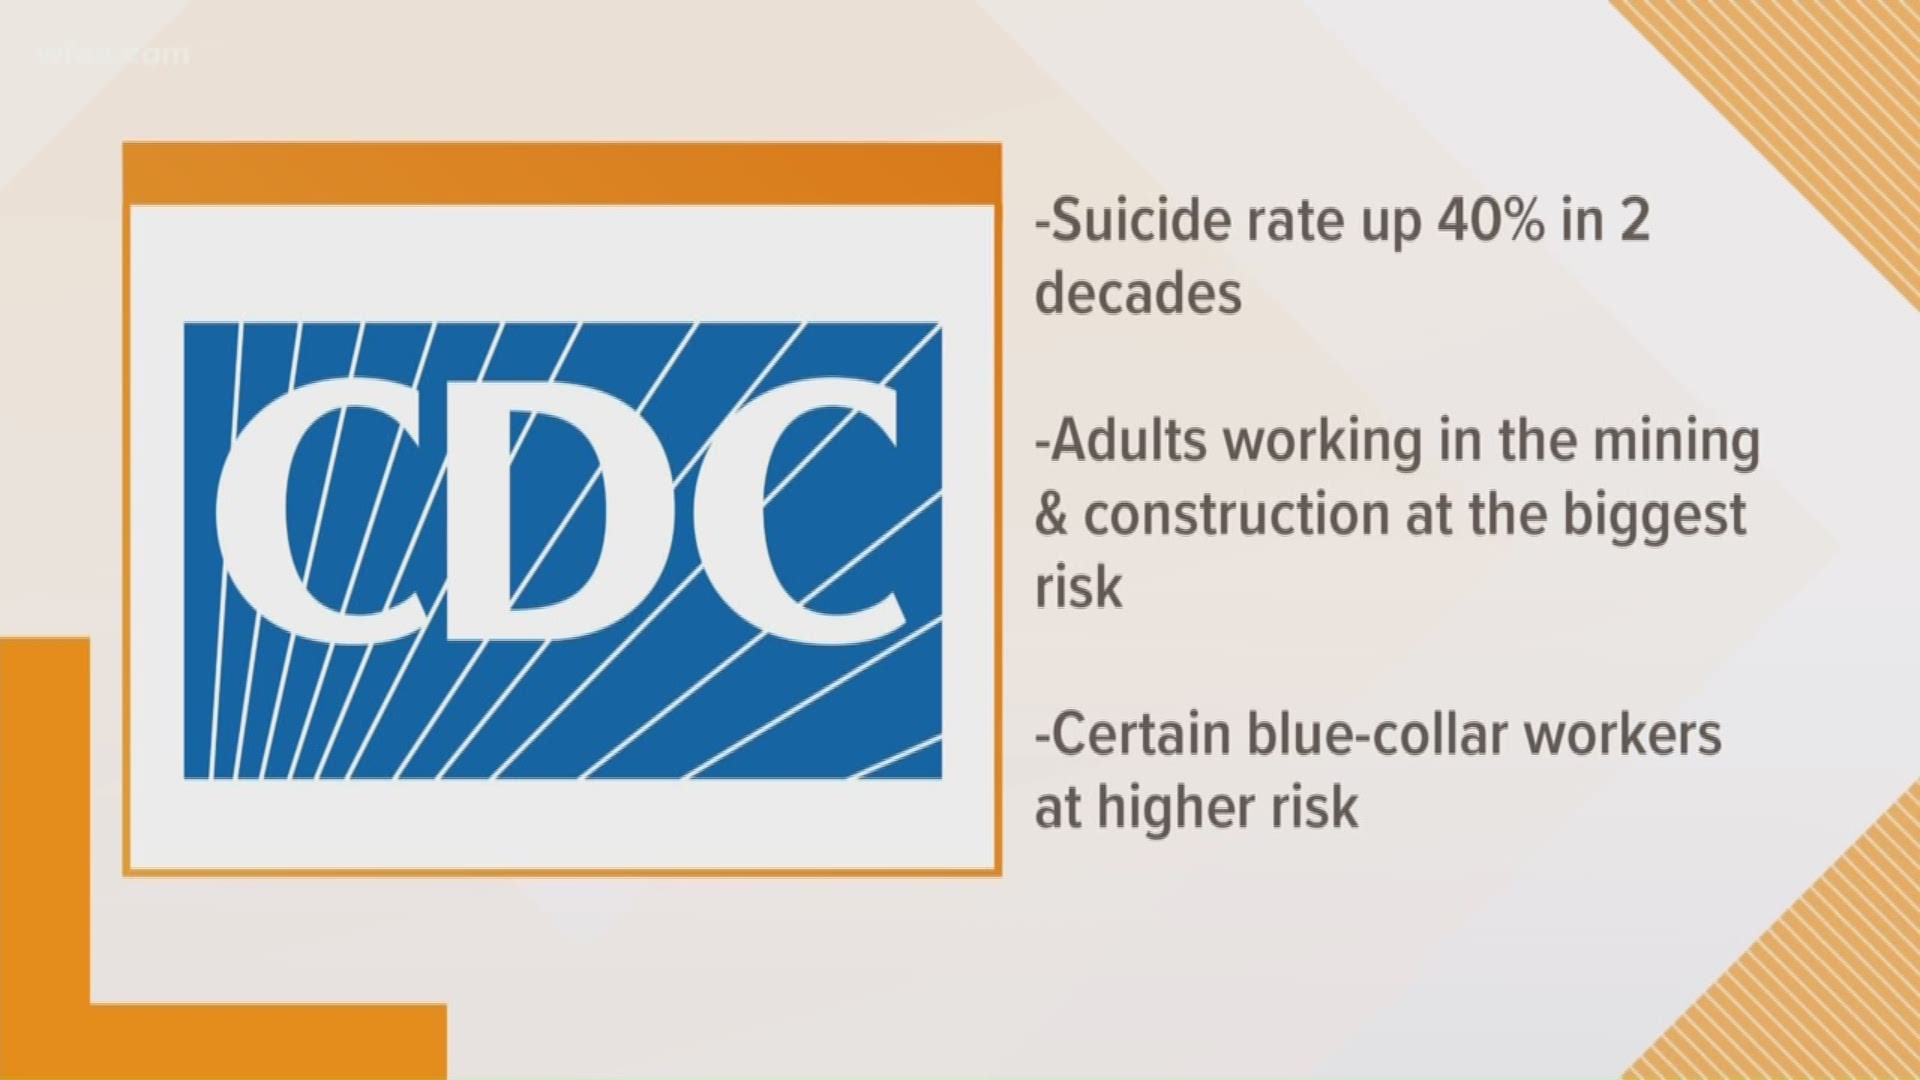 Suicide rates have increased by 40 percent in the past two decades, according to the CDC.